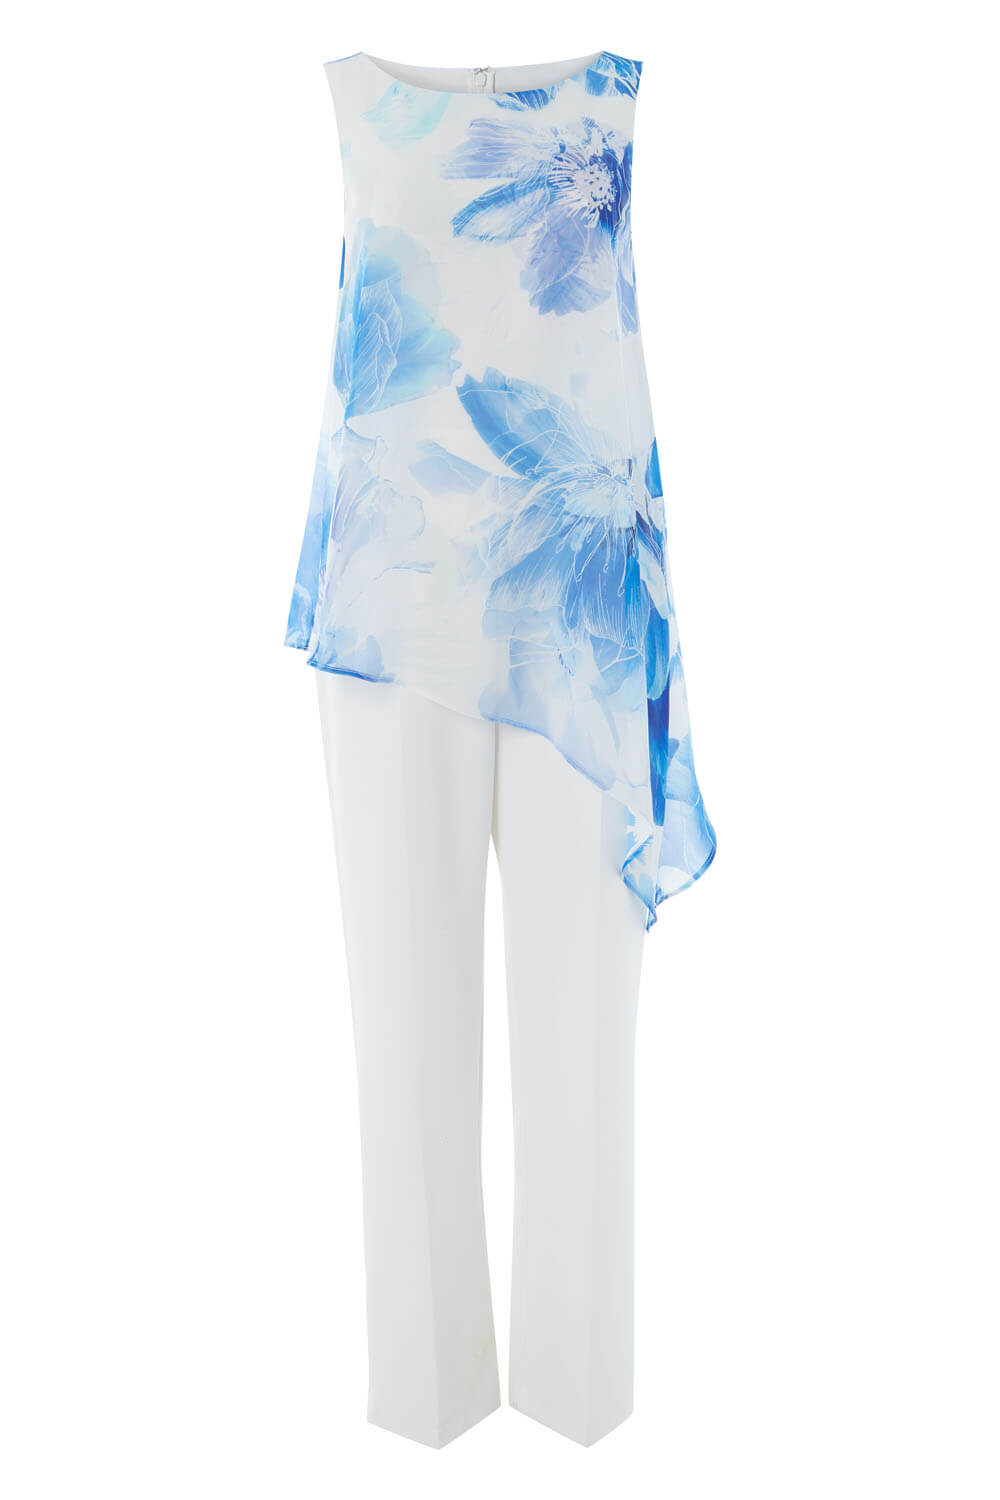 Royal Blue Floral Chiffon Overlay Jumpsuit, Image 4 of 4